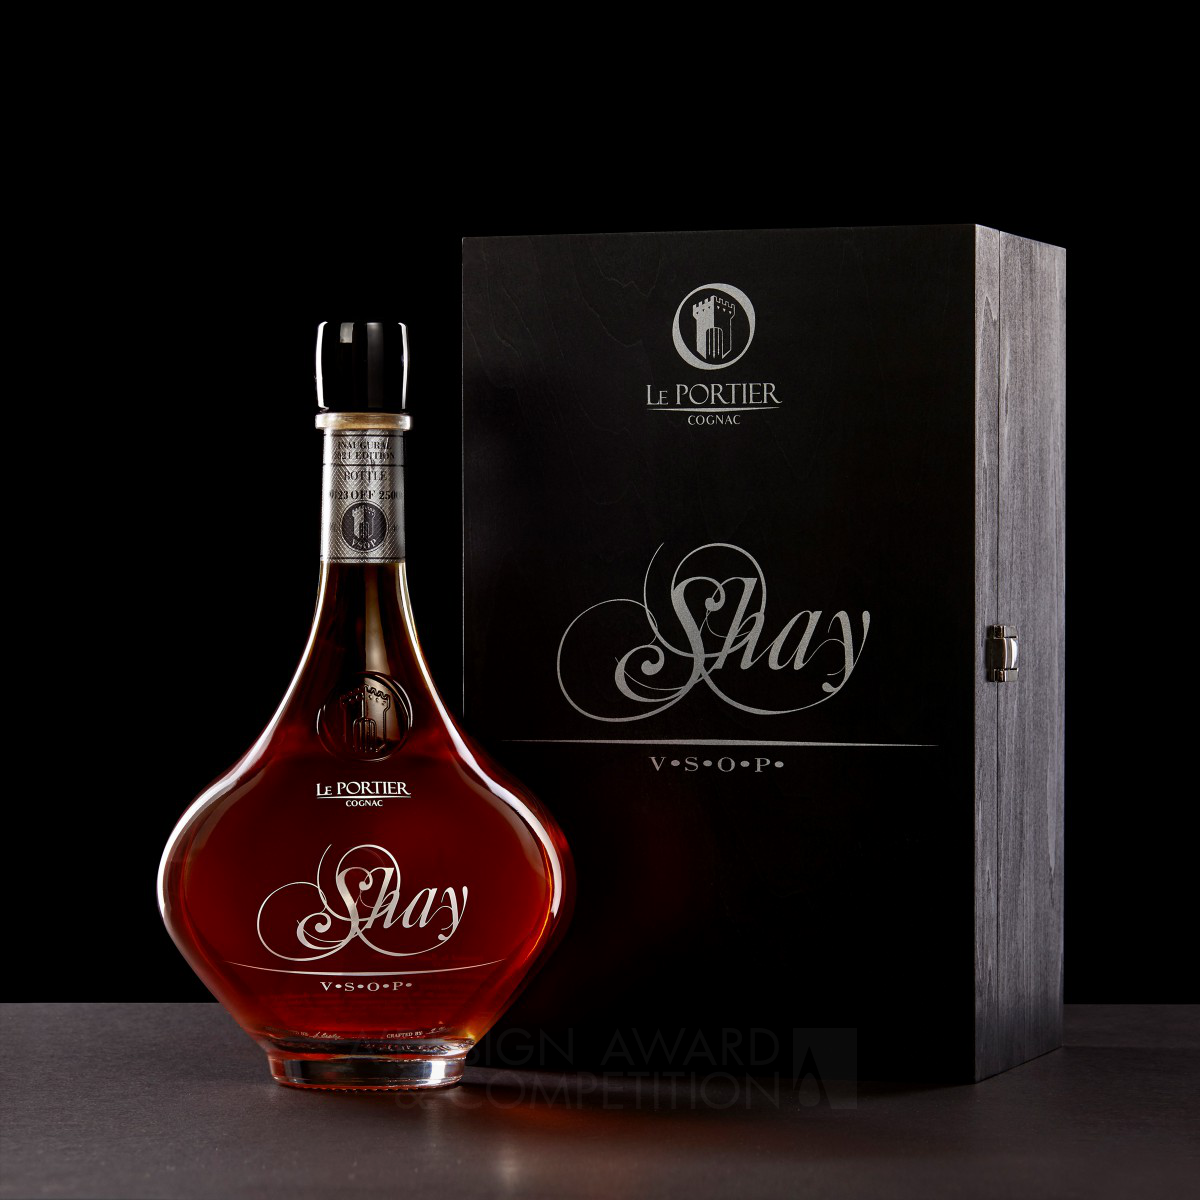 Shay VSOP: Elevating the Cognac Experience